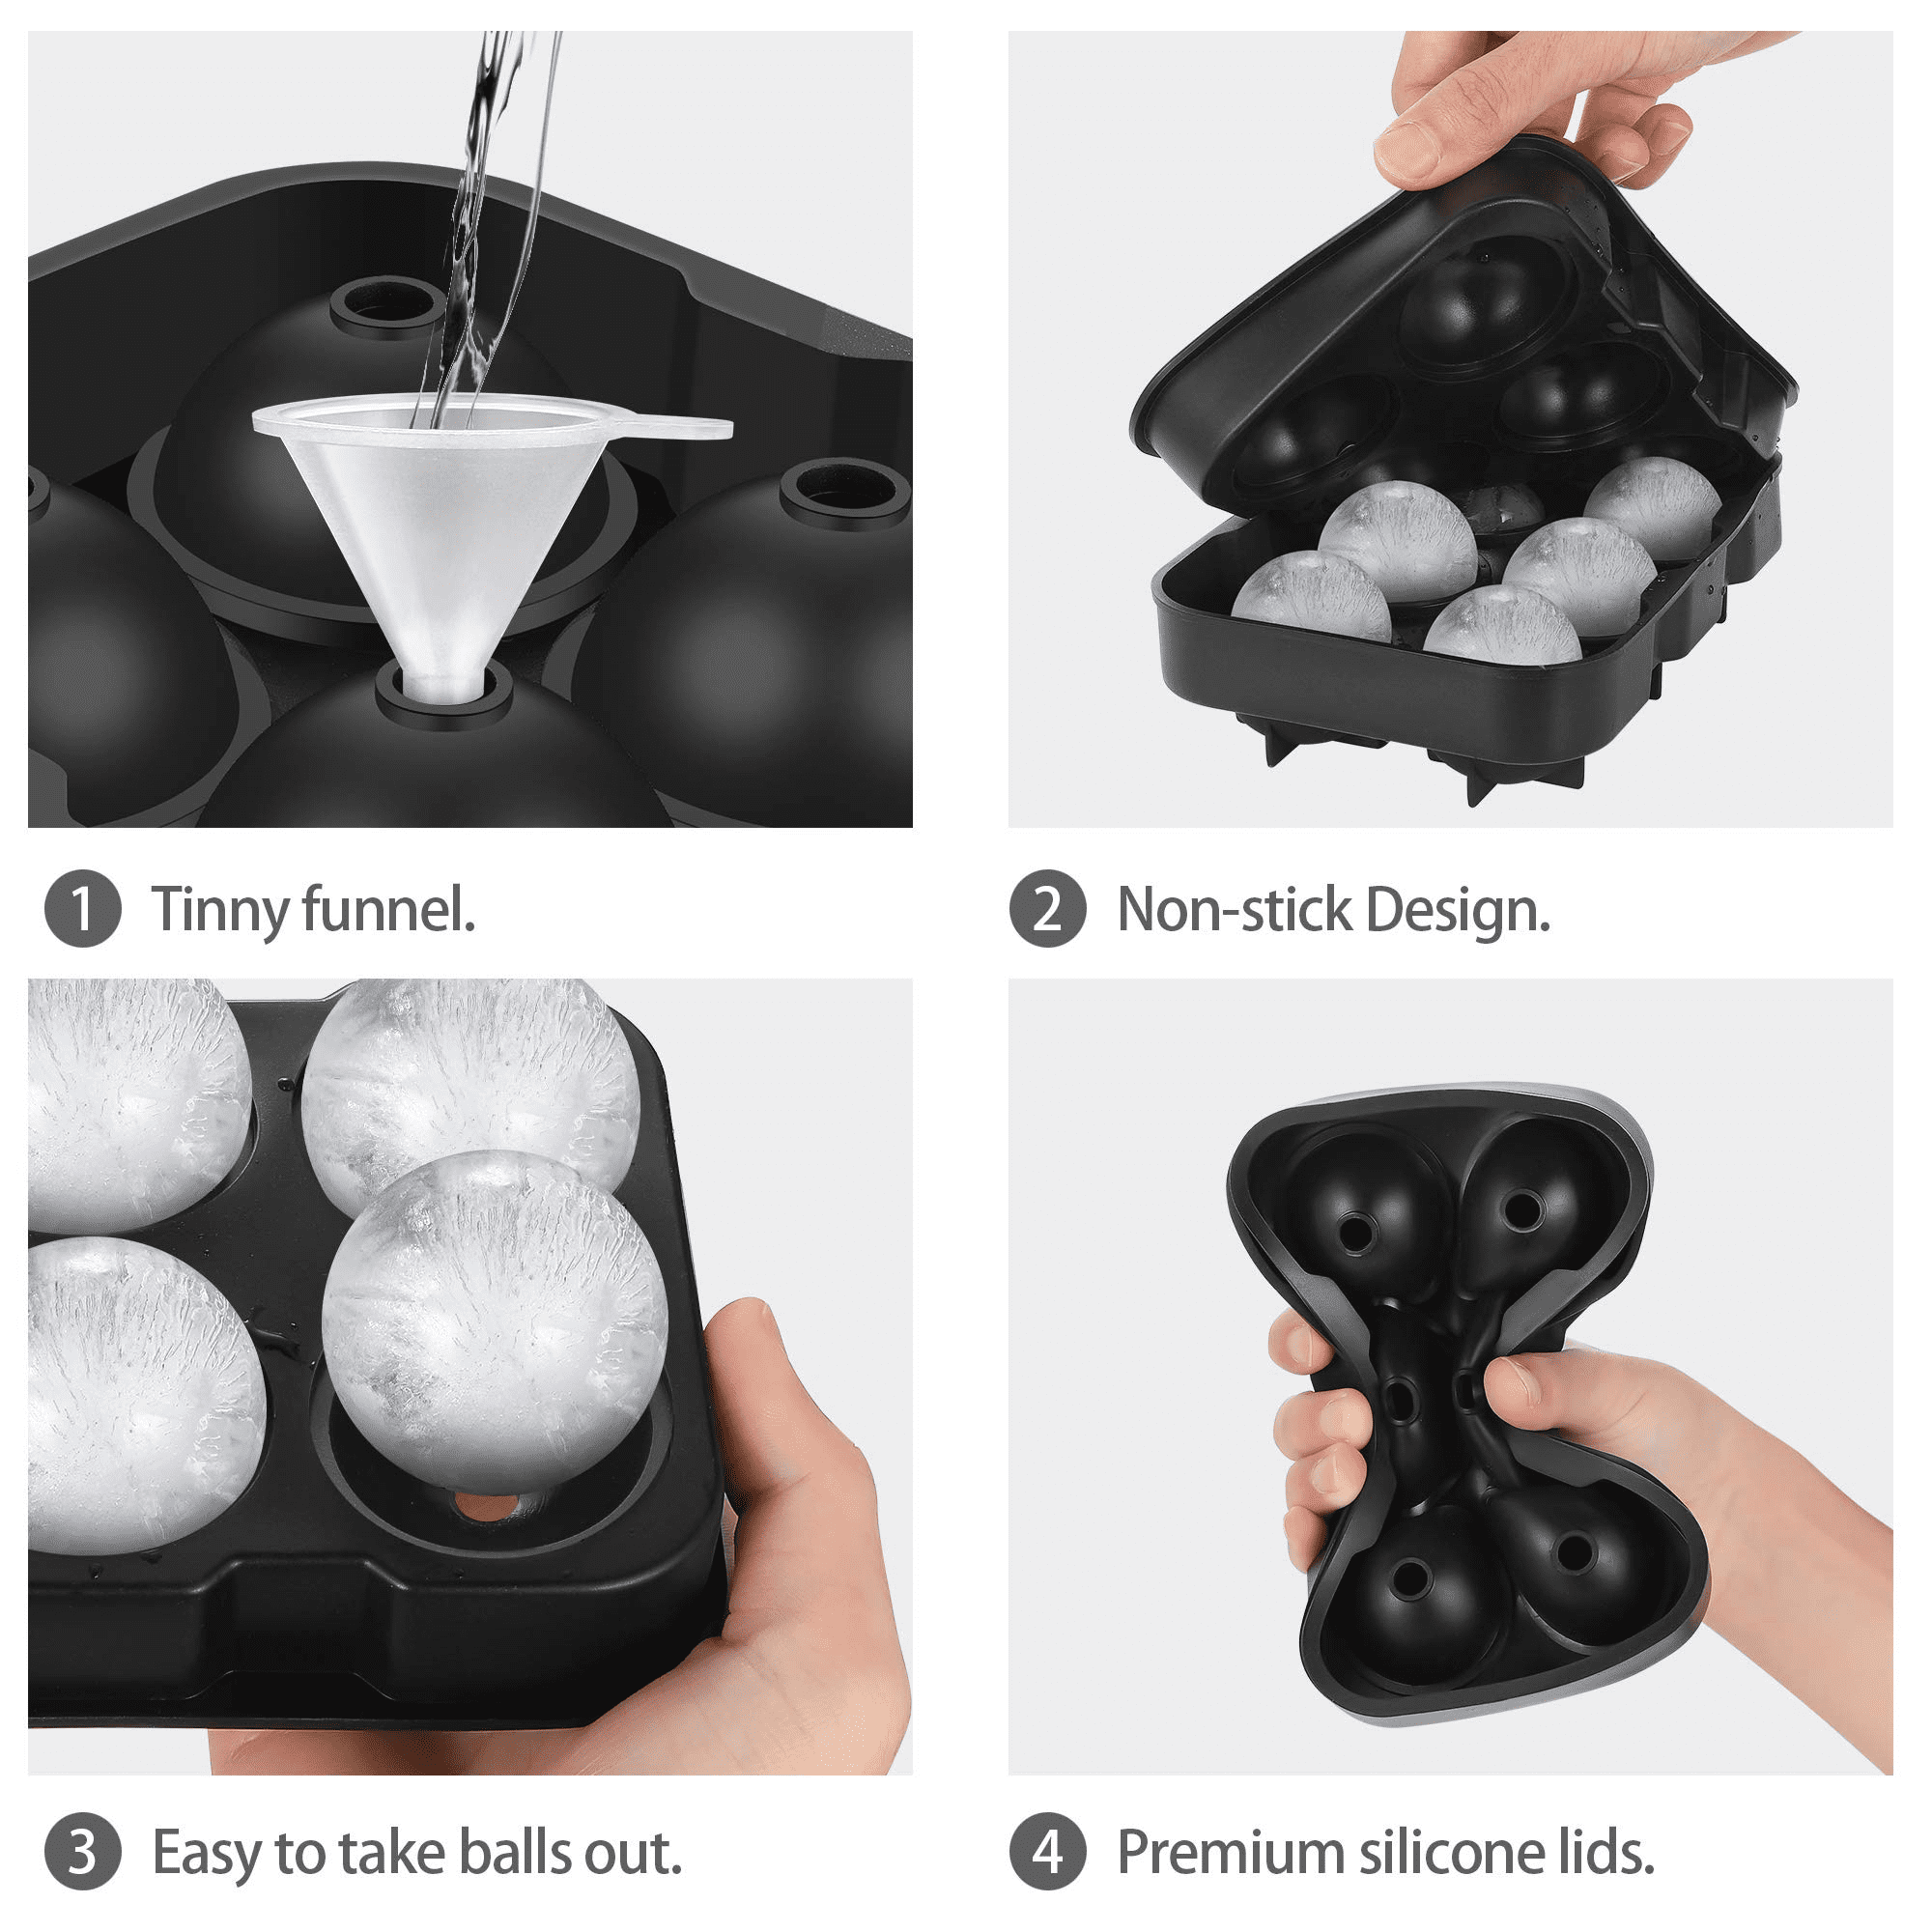 Deago Ice Cube Trays, Diamond Shaped Fun Ice Cube Moulds Silicone Flexible Ice Maker for Chilling Whiskey Cocktails (1 Set Black)